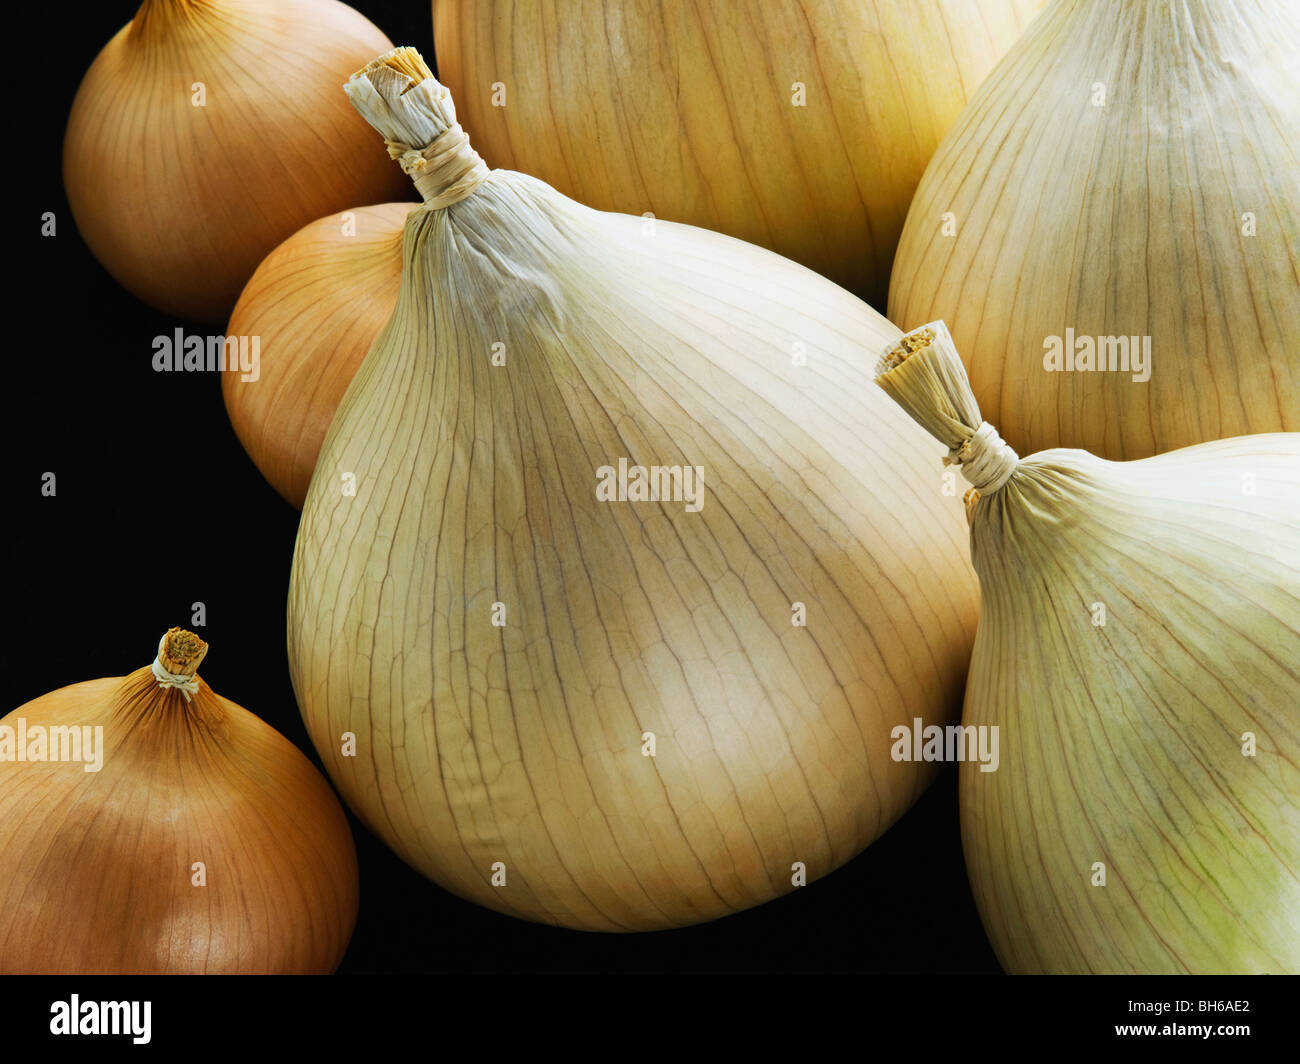 A group of onions both small and large Stock Photo